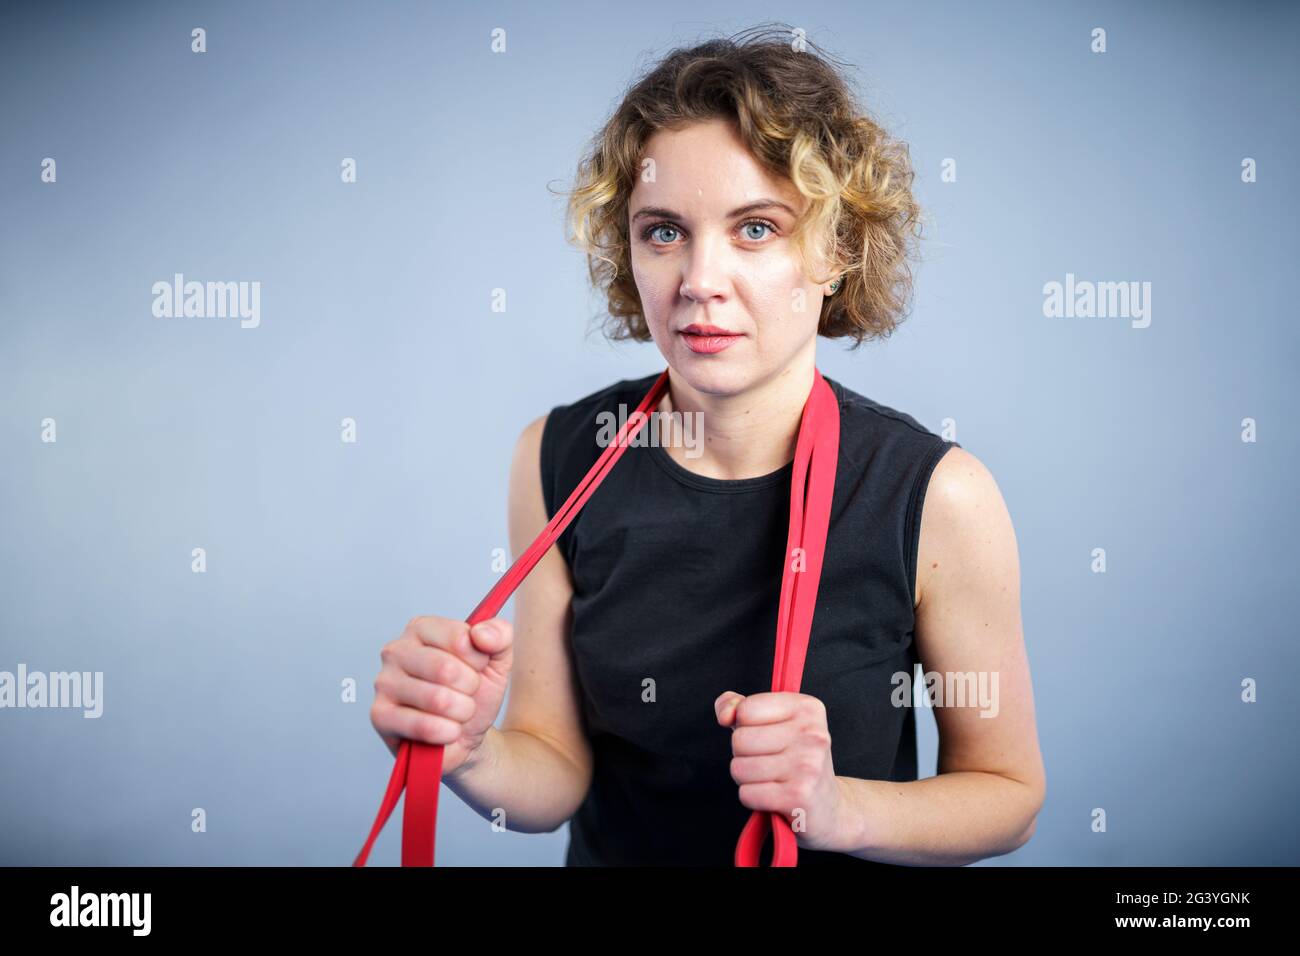 Sports woman exercising with a resistance band. Slim girl in good shape. People, sport and fitness concept. Exercise bands worki Stock Photo